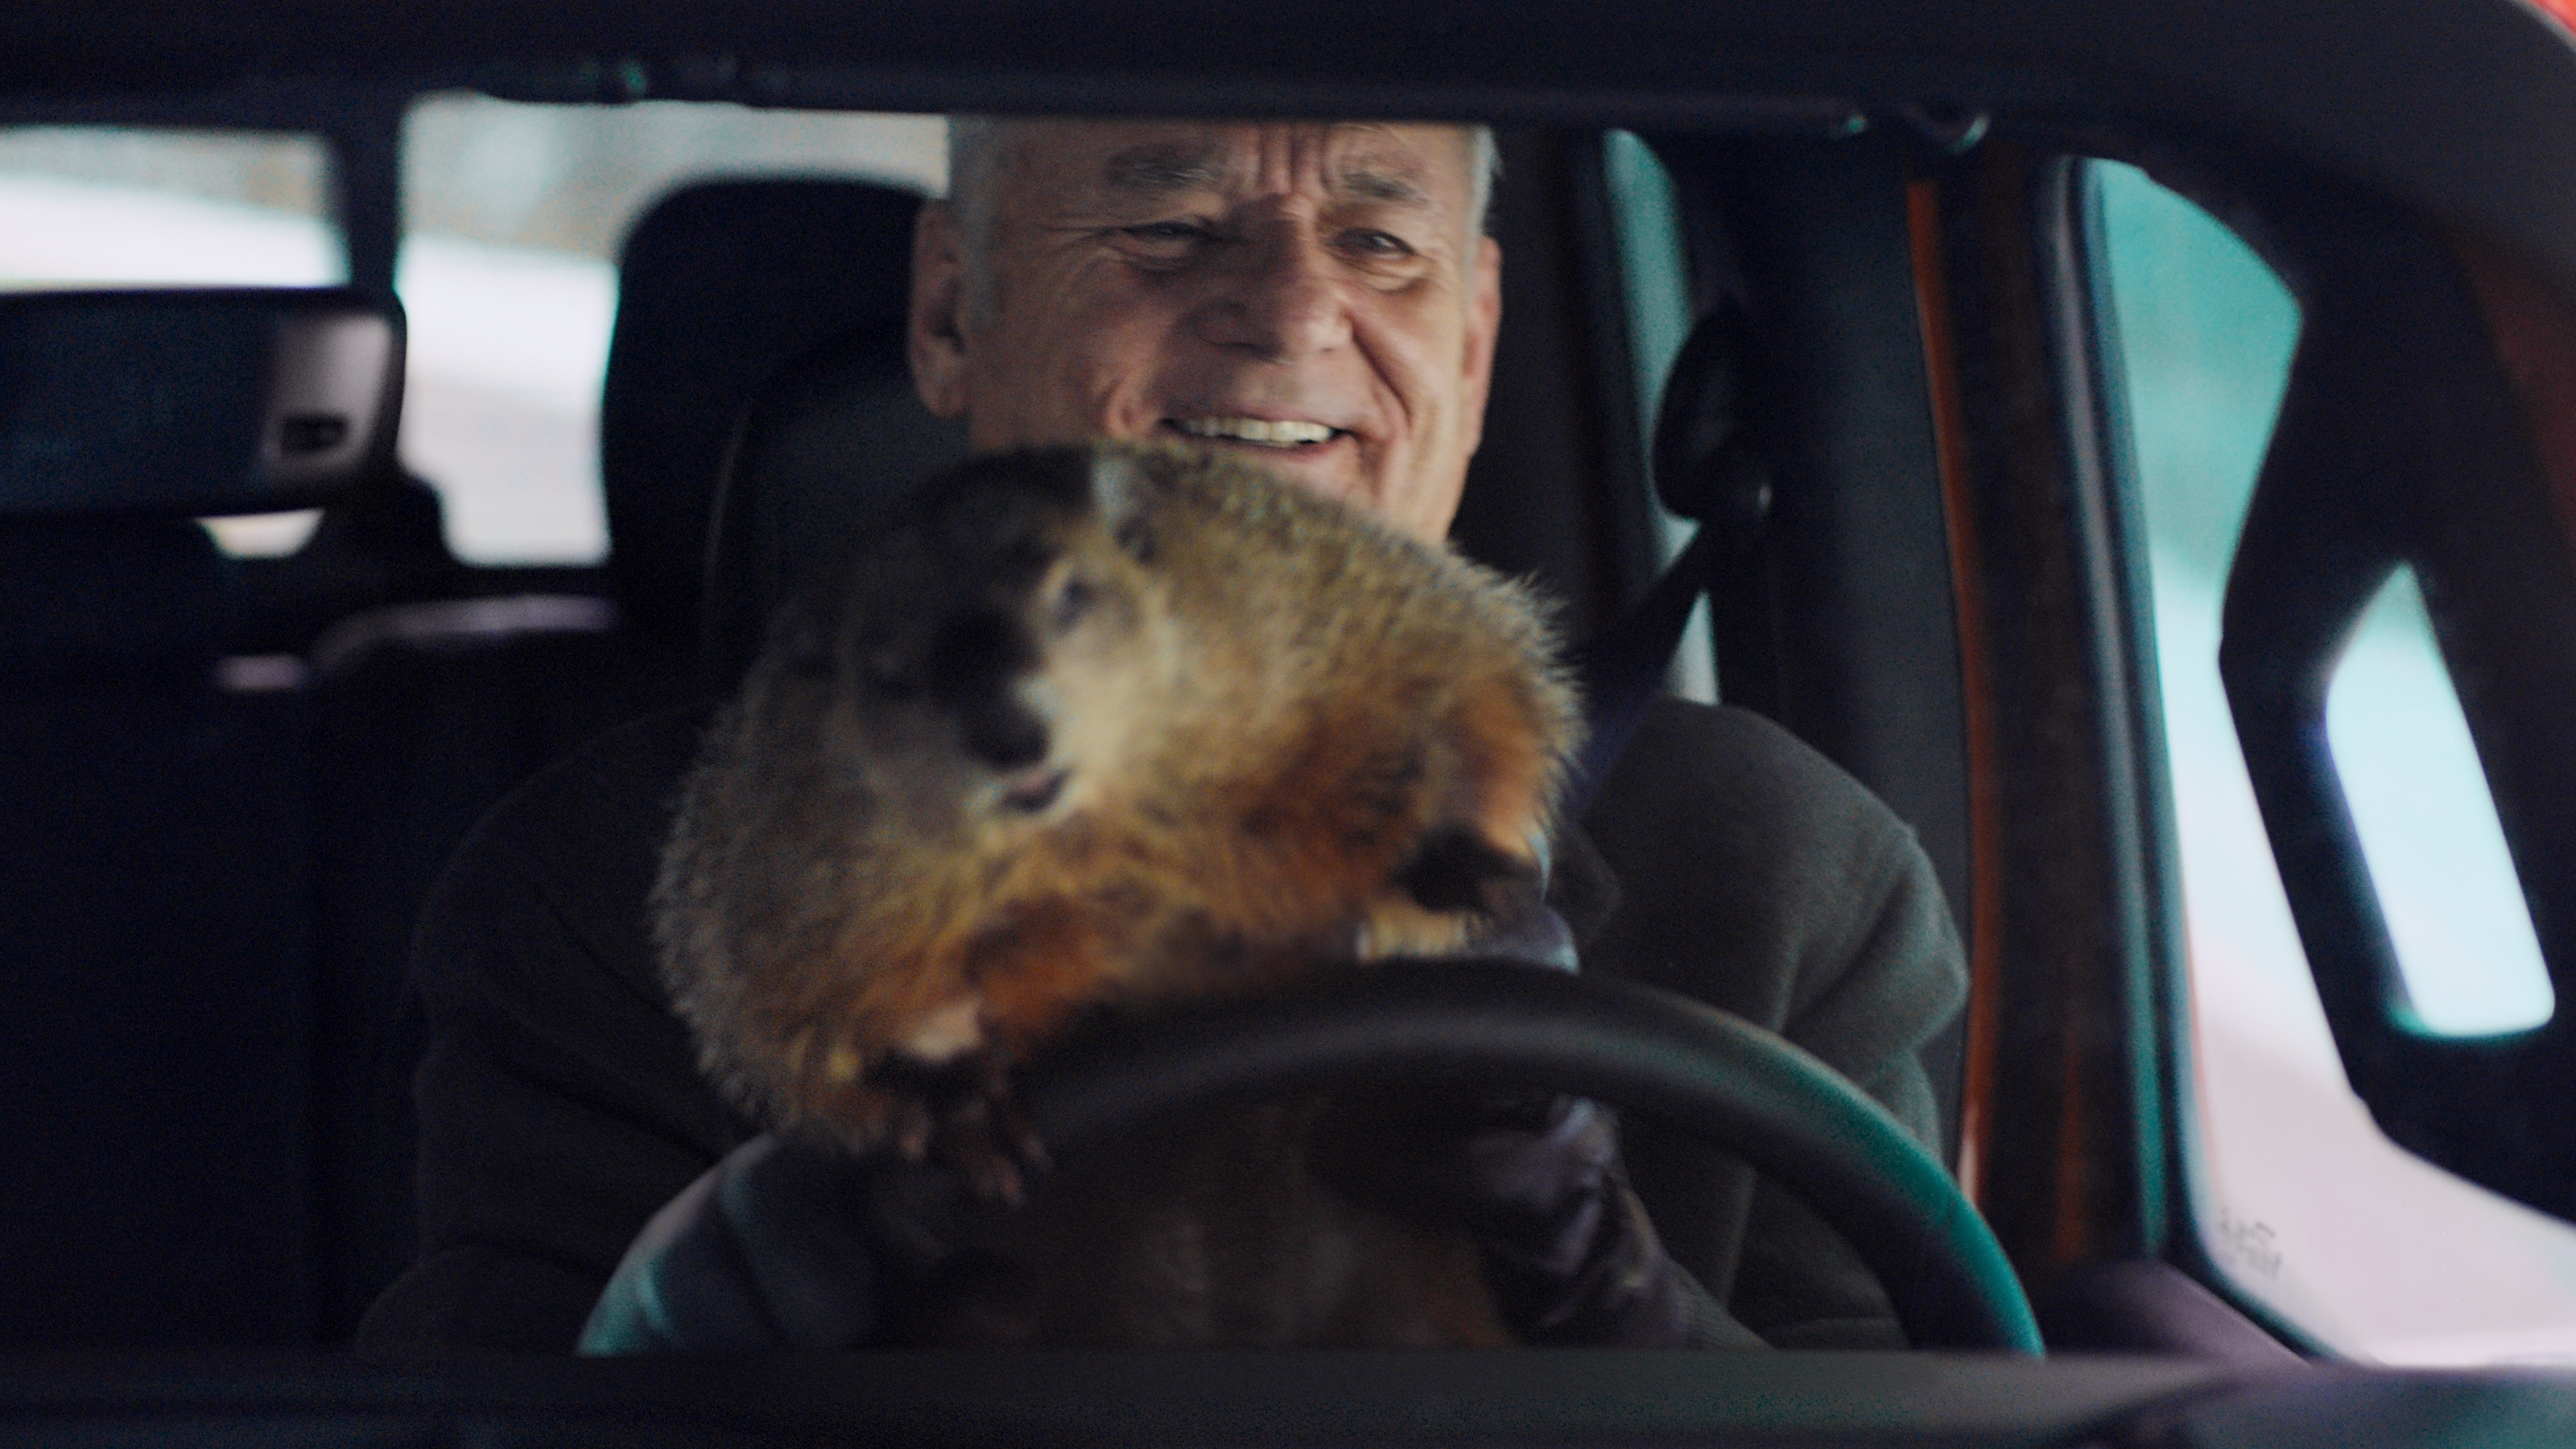 How Jeep Landed Bill Murray for its ‘Groundhog Day’ Super Bowl Ad